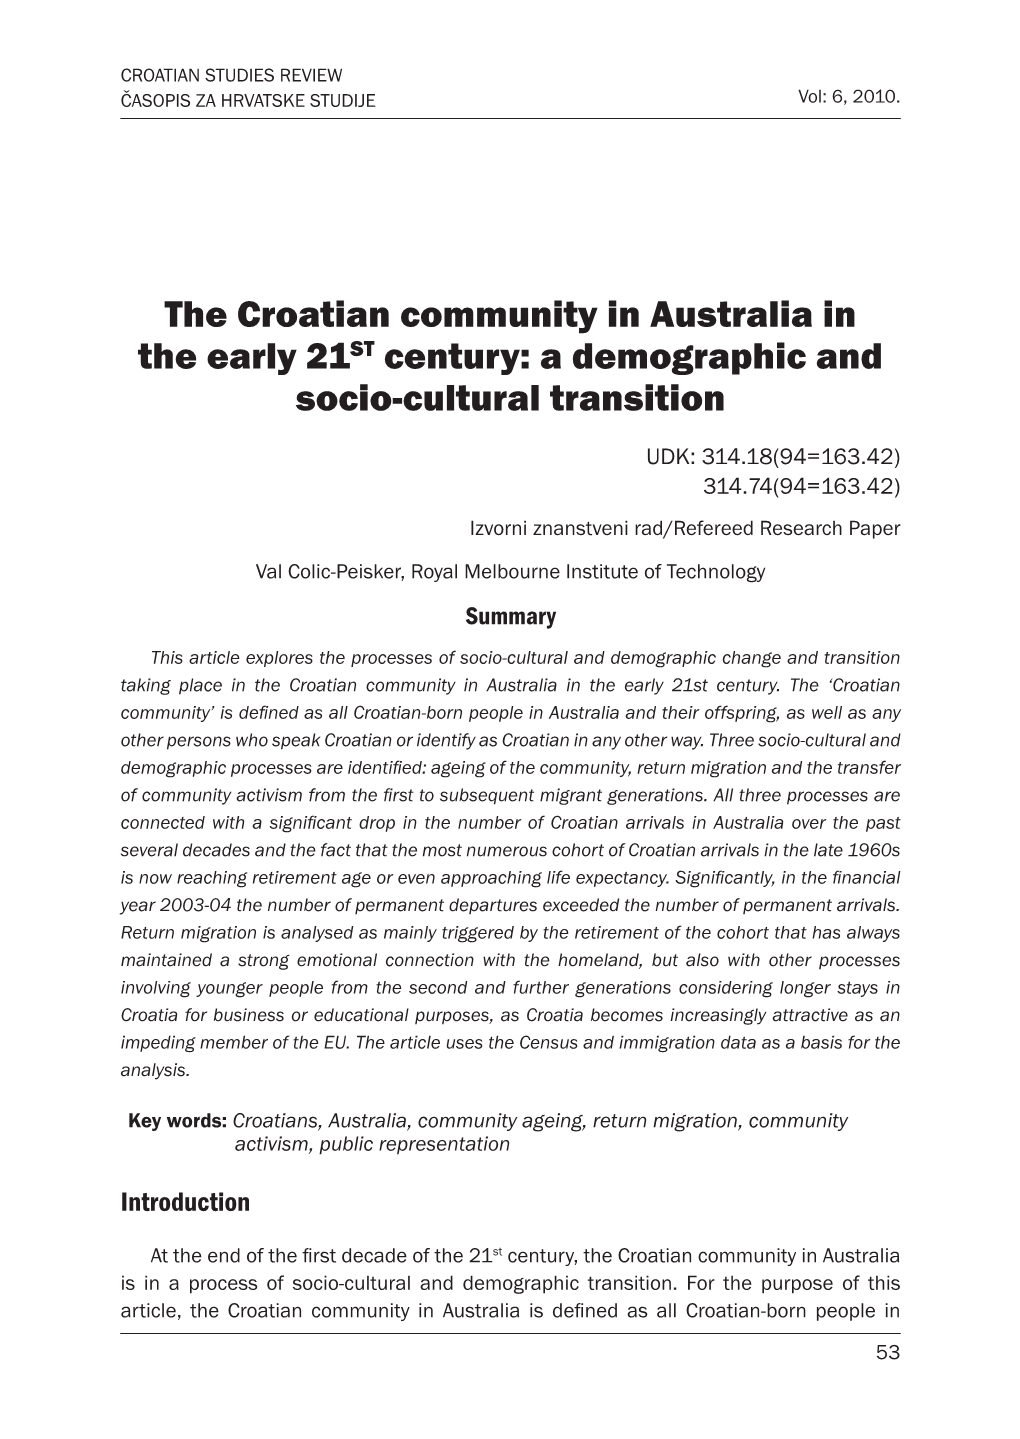 The Croatian Community in Australia in the Early 21ST Century: a Demographic and Socio-Cultural Transition